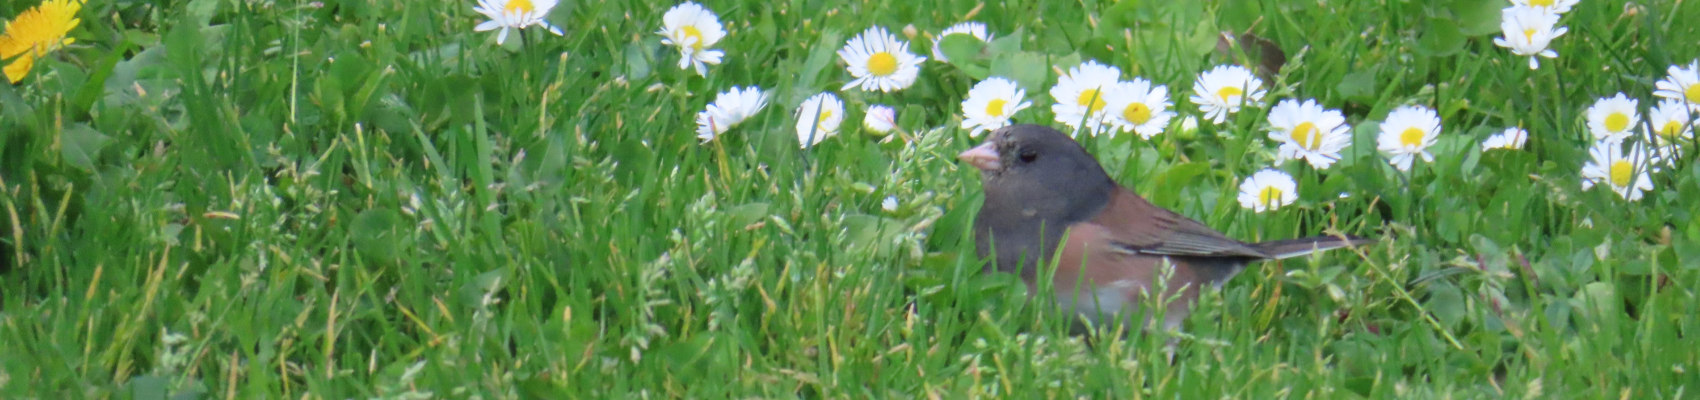 A little brown bird looks out haughtily from amidst a daisy studded lawn.